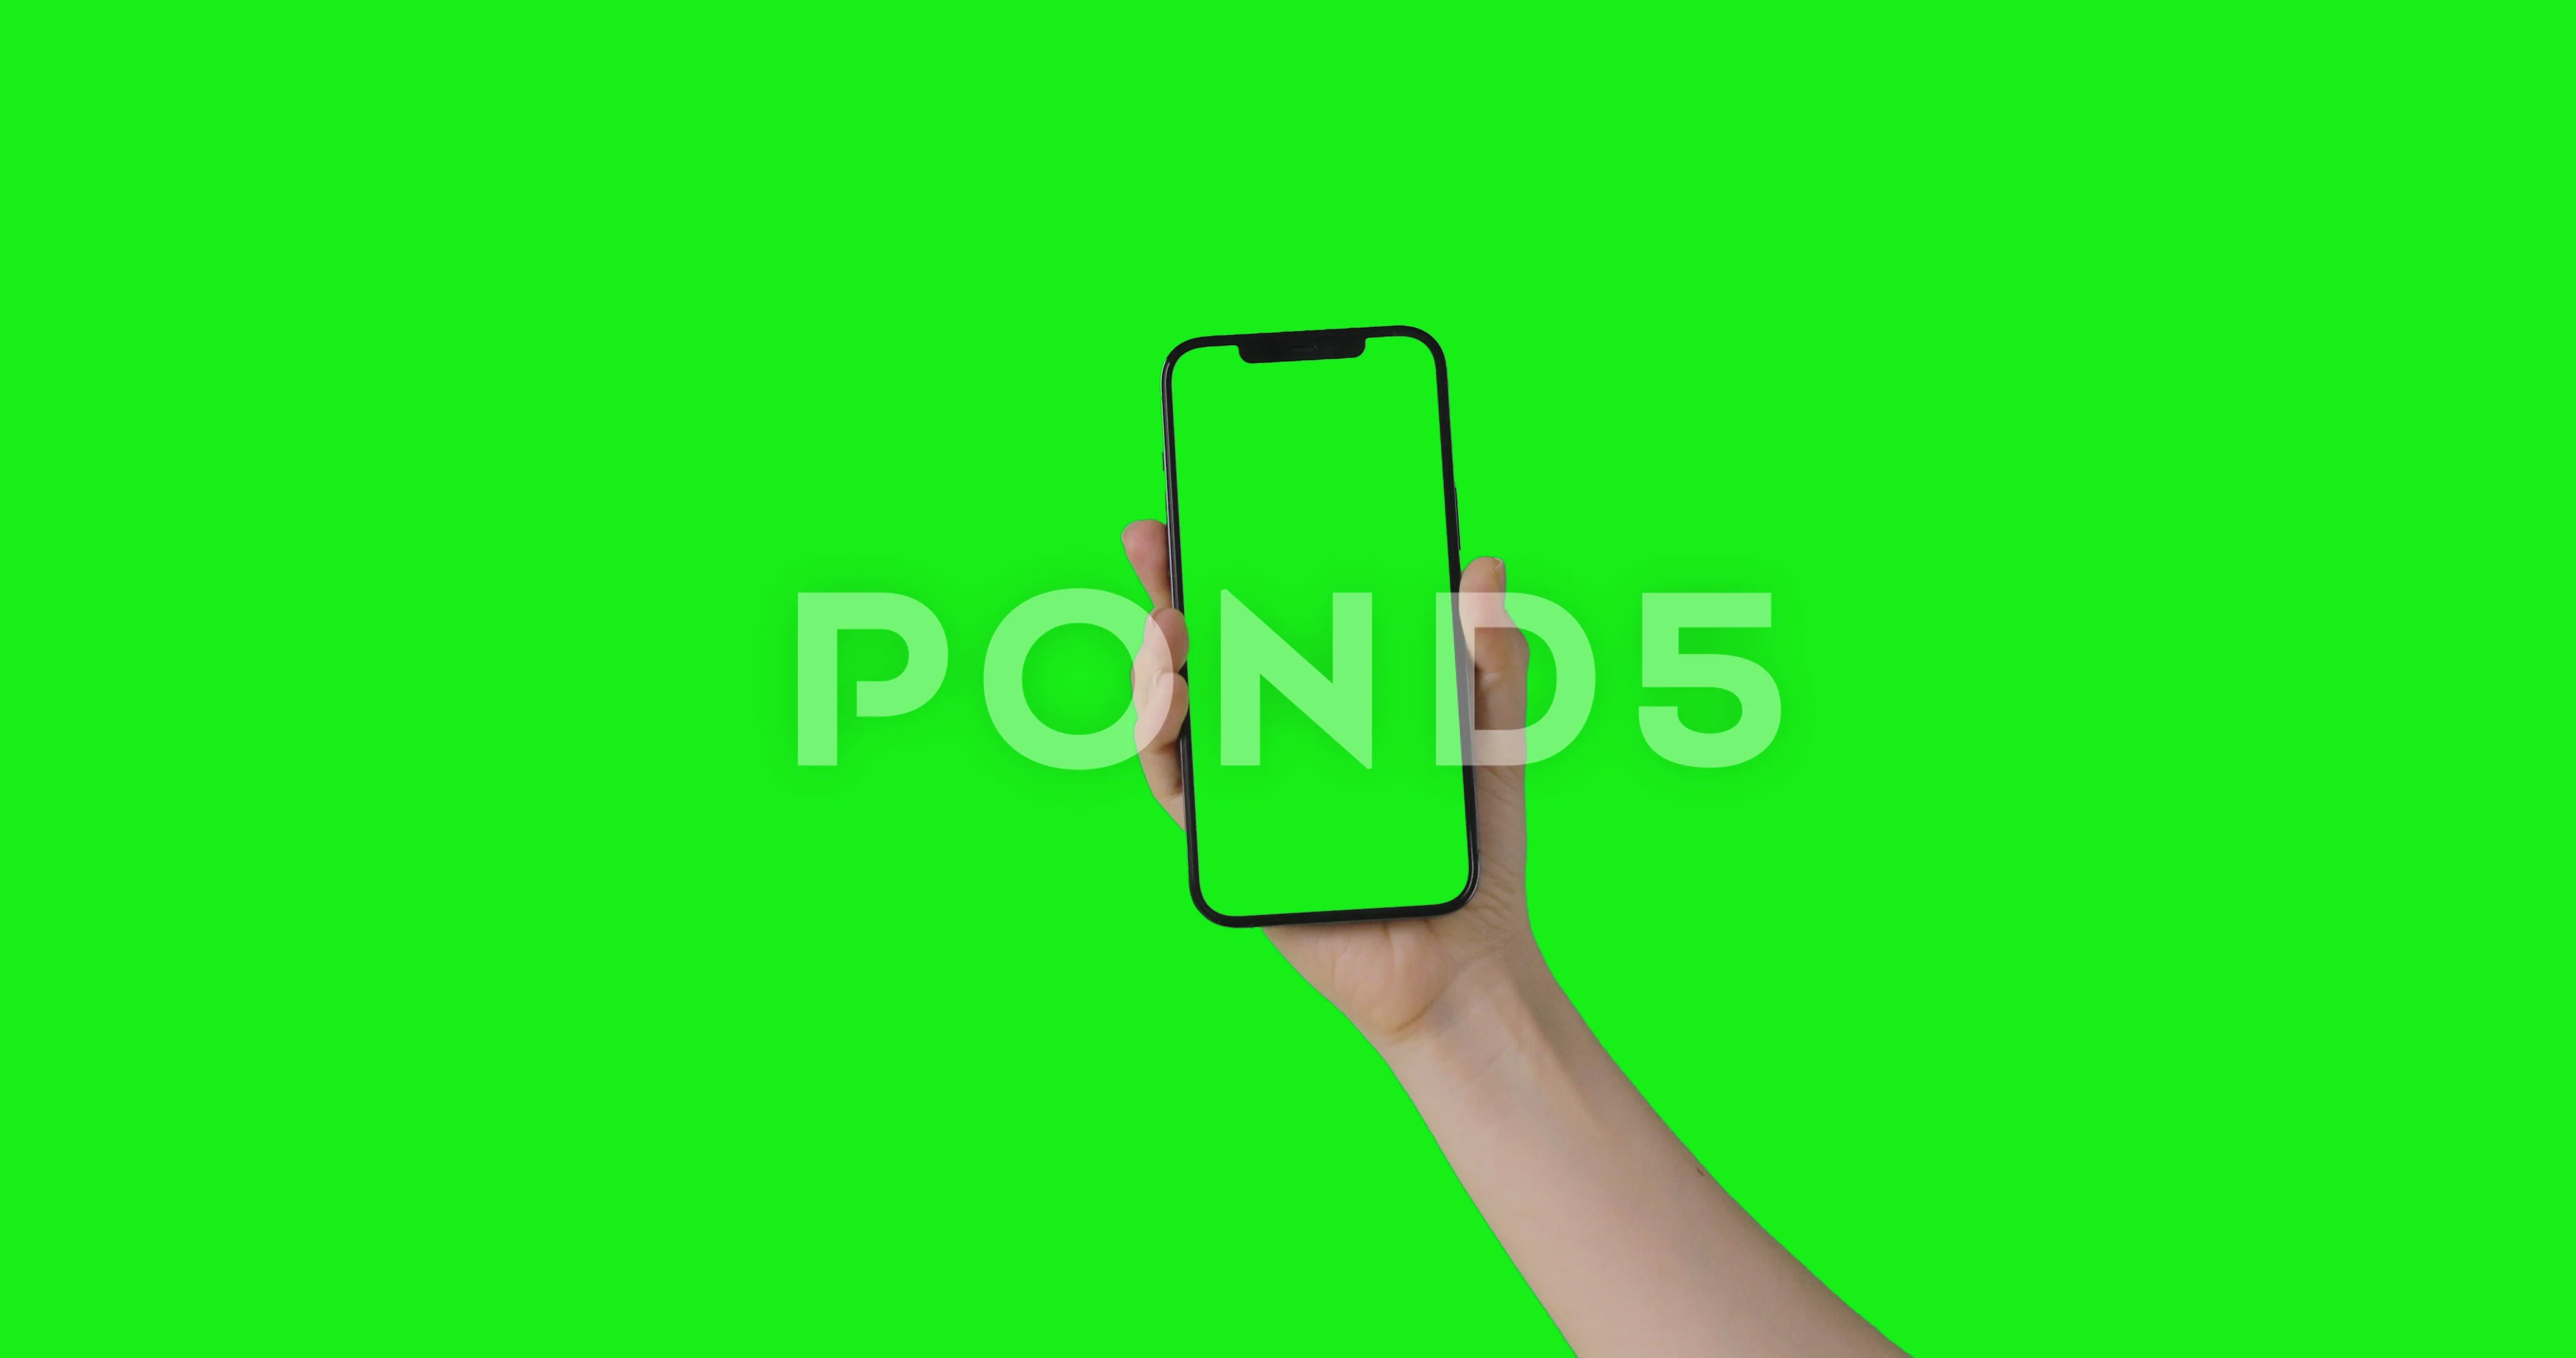 Iphone Green Screen Stock Video Footage Royalty Free Iphone Green Screen Videos Pond5